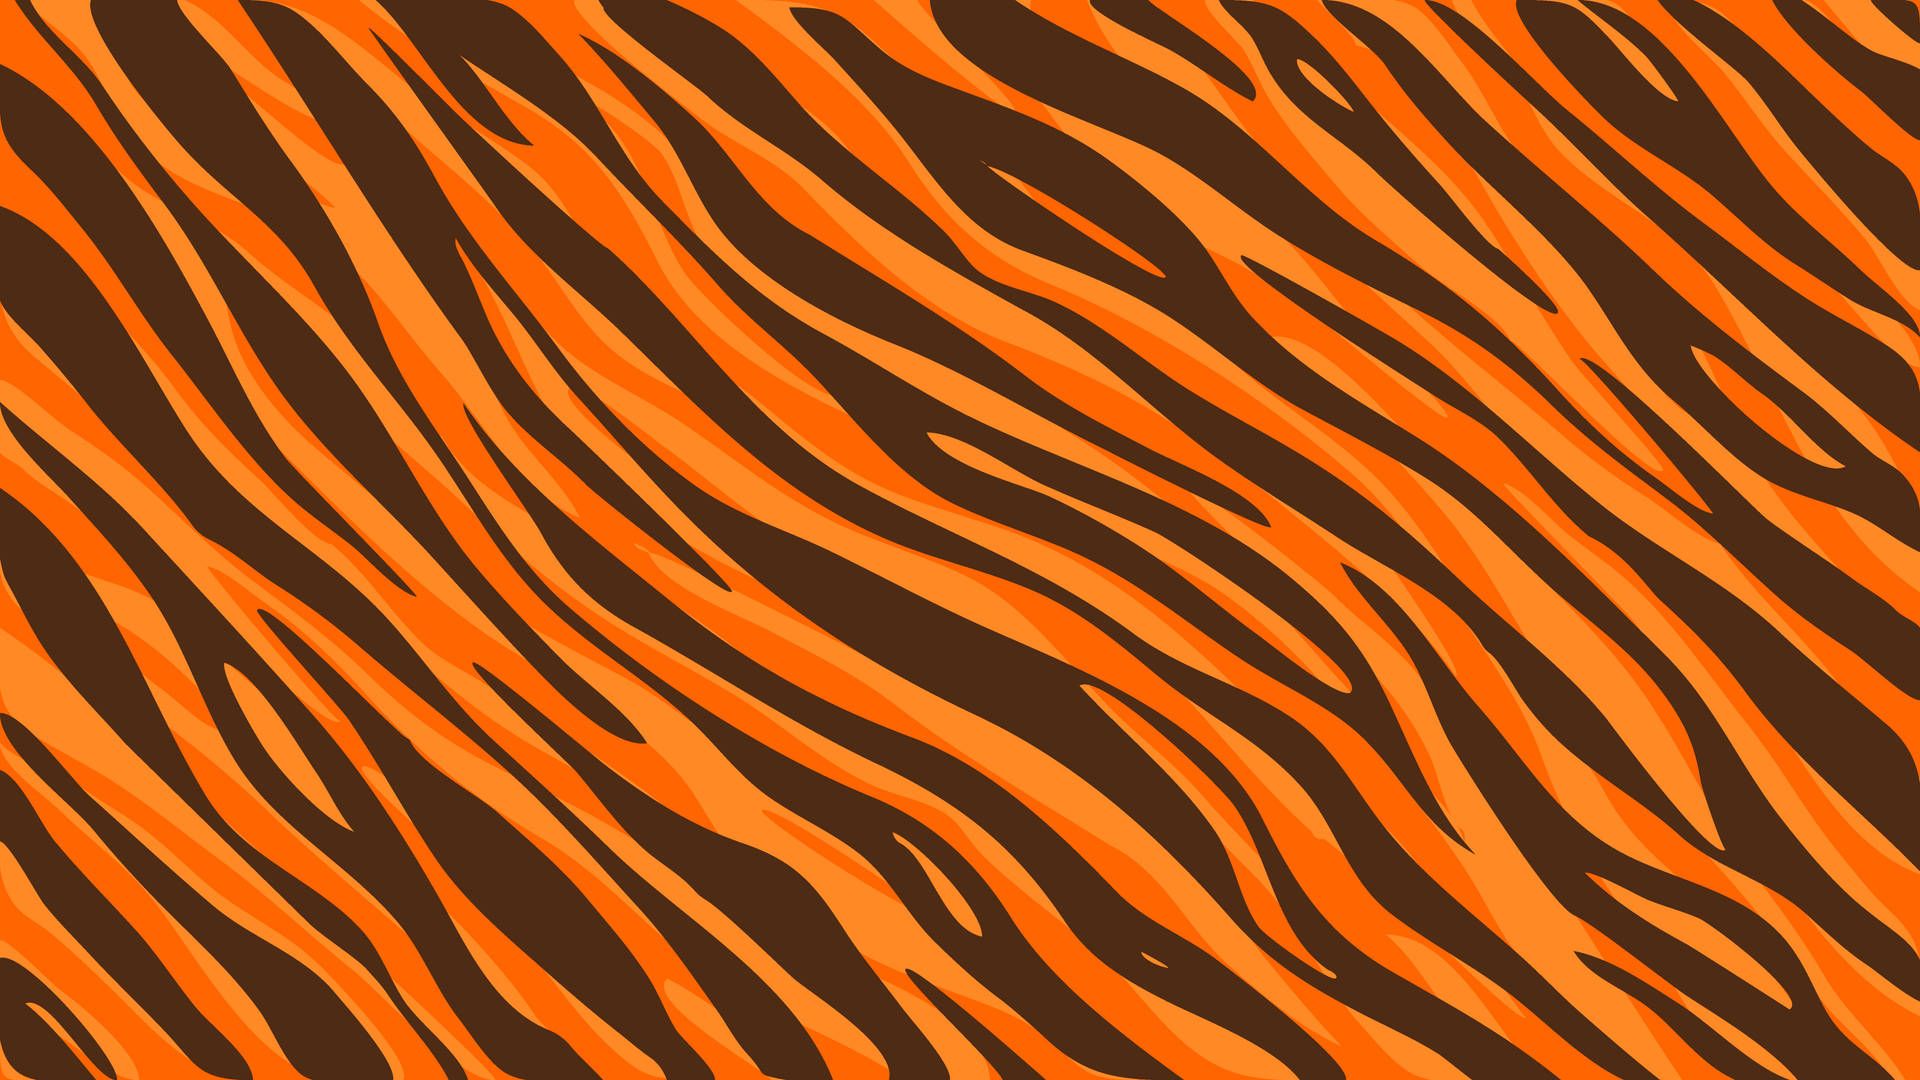 Tiger Stripes Wallpapers - Top Free Tiger Stripes Backgrounds ...